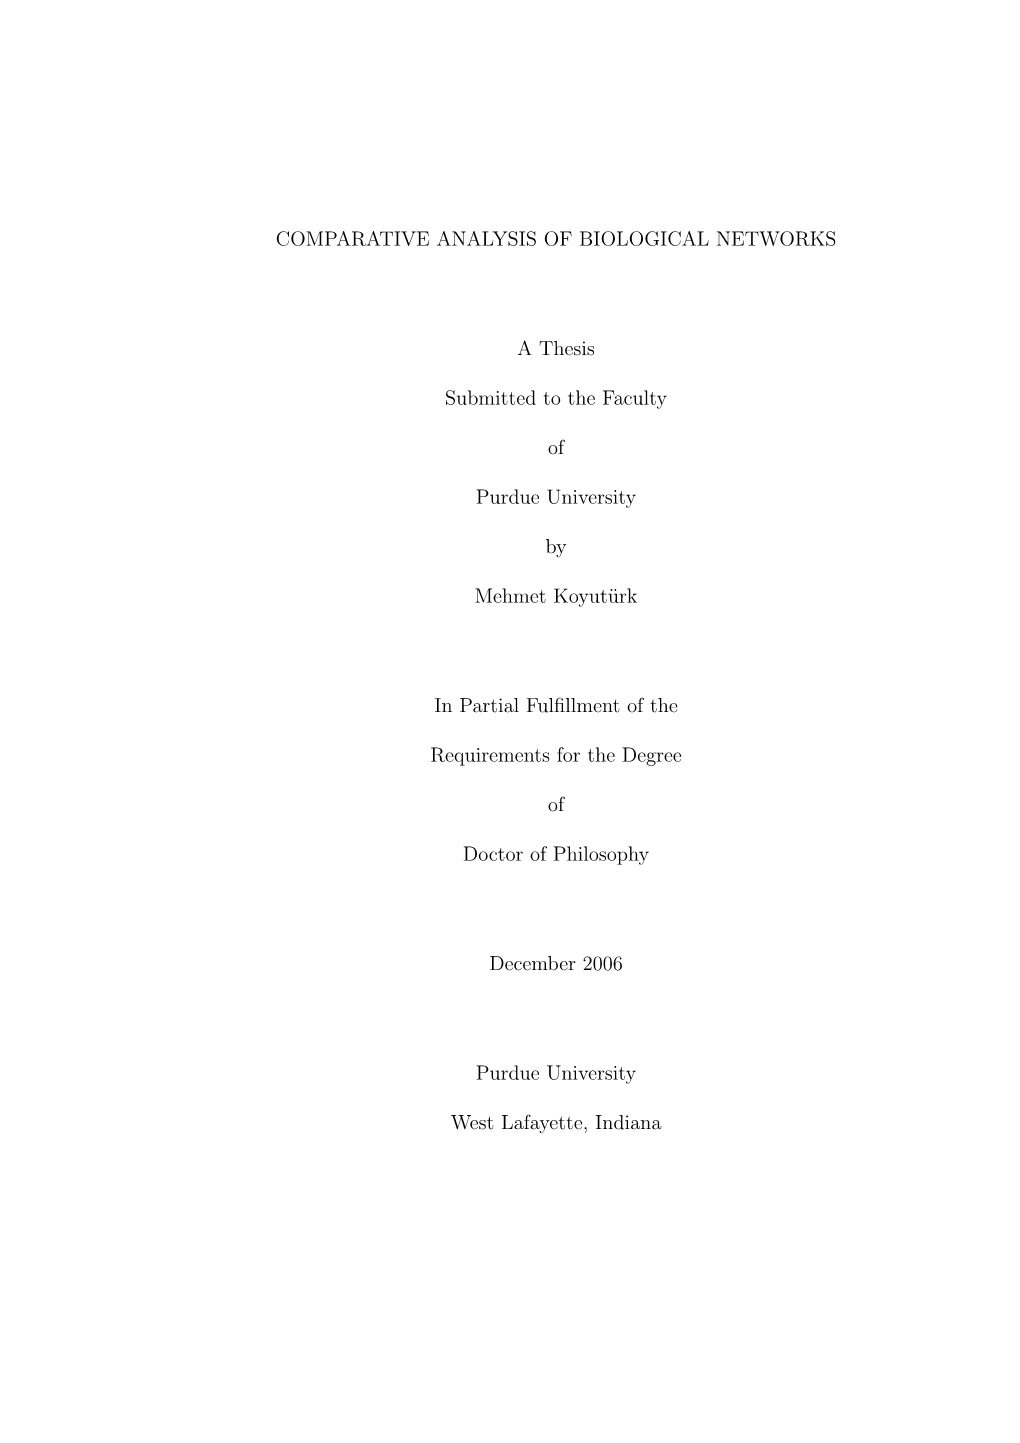 COMPARATIVE ANALYSIS of BIOLOGICAL NETWORKS a Thesis Submitted to the Faculty of Purdue University by Mehmet Koyutürk in Partia